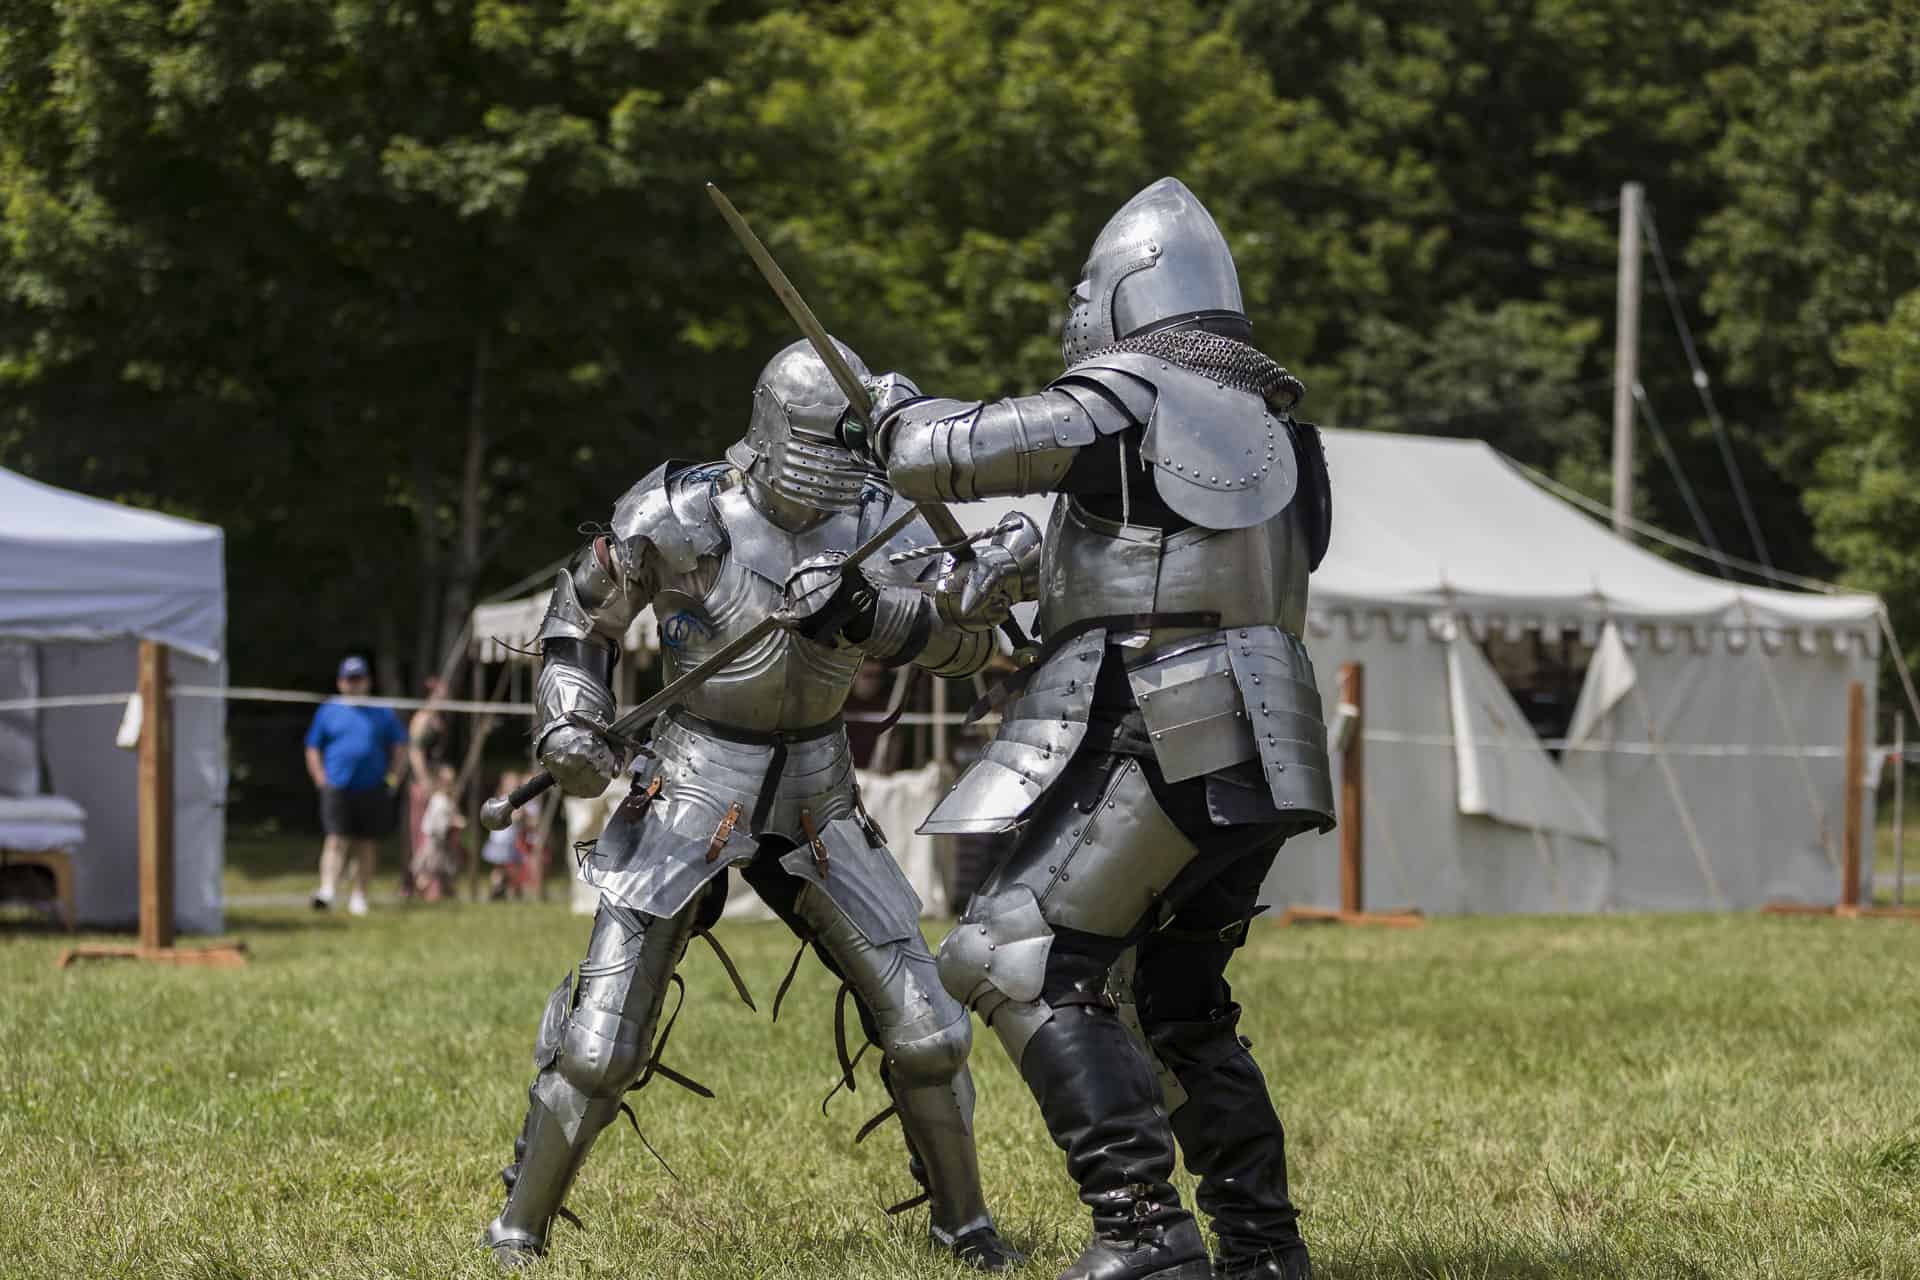 fully armored knights sparring wtih swords